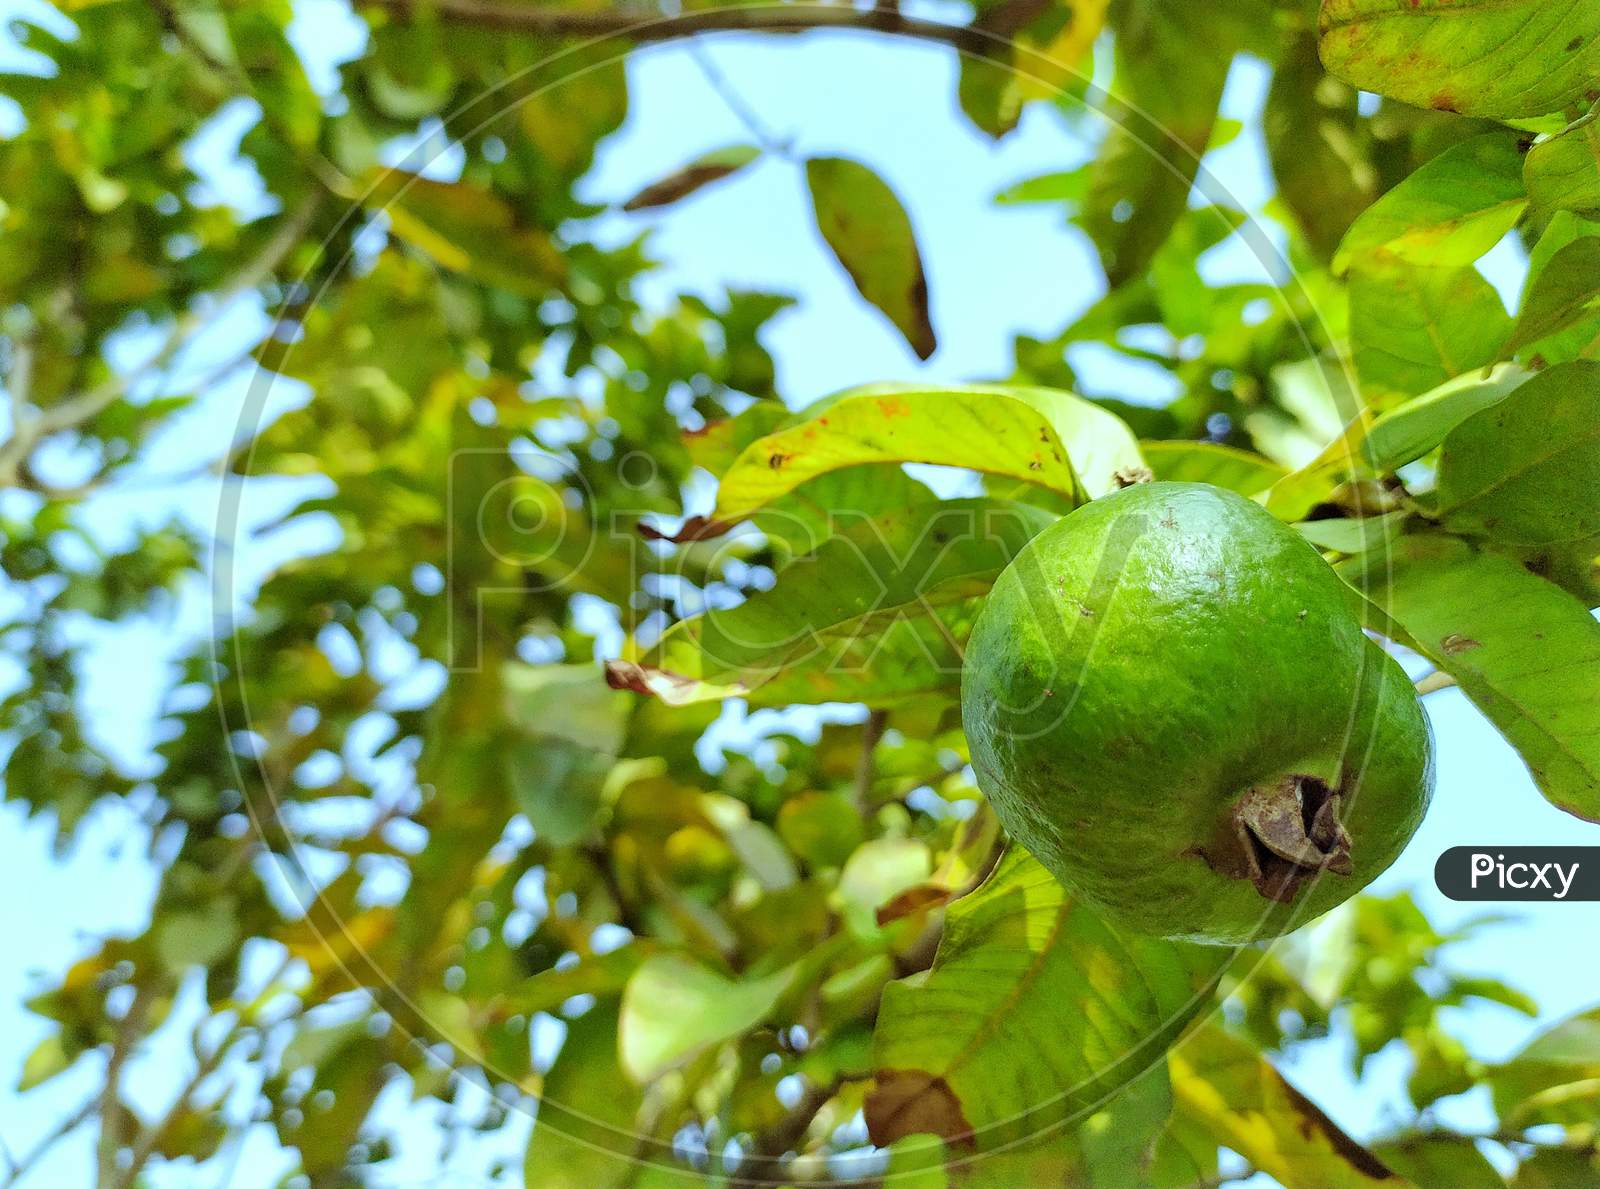 Guava hanging in the garden of India.